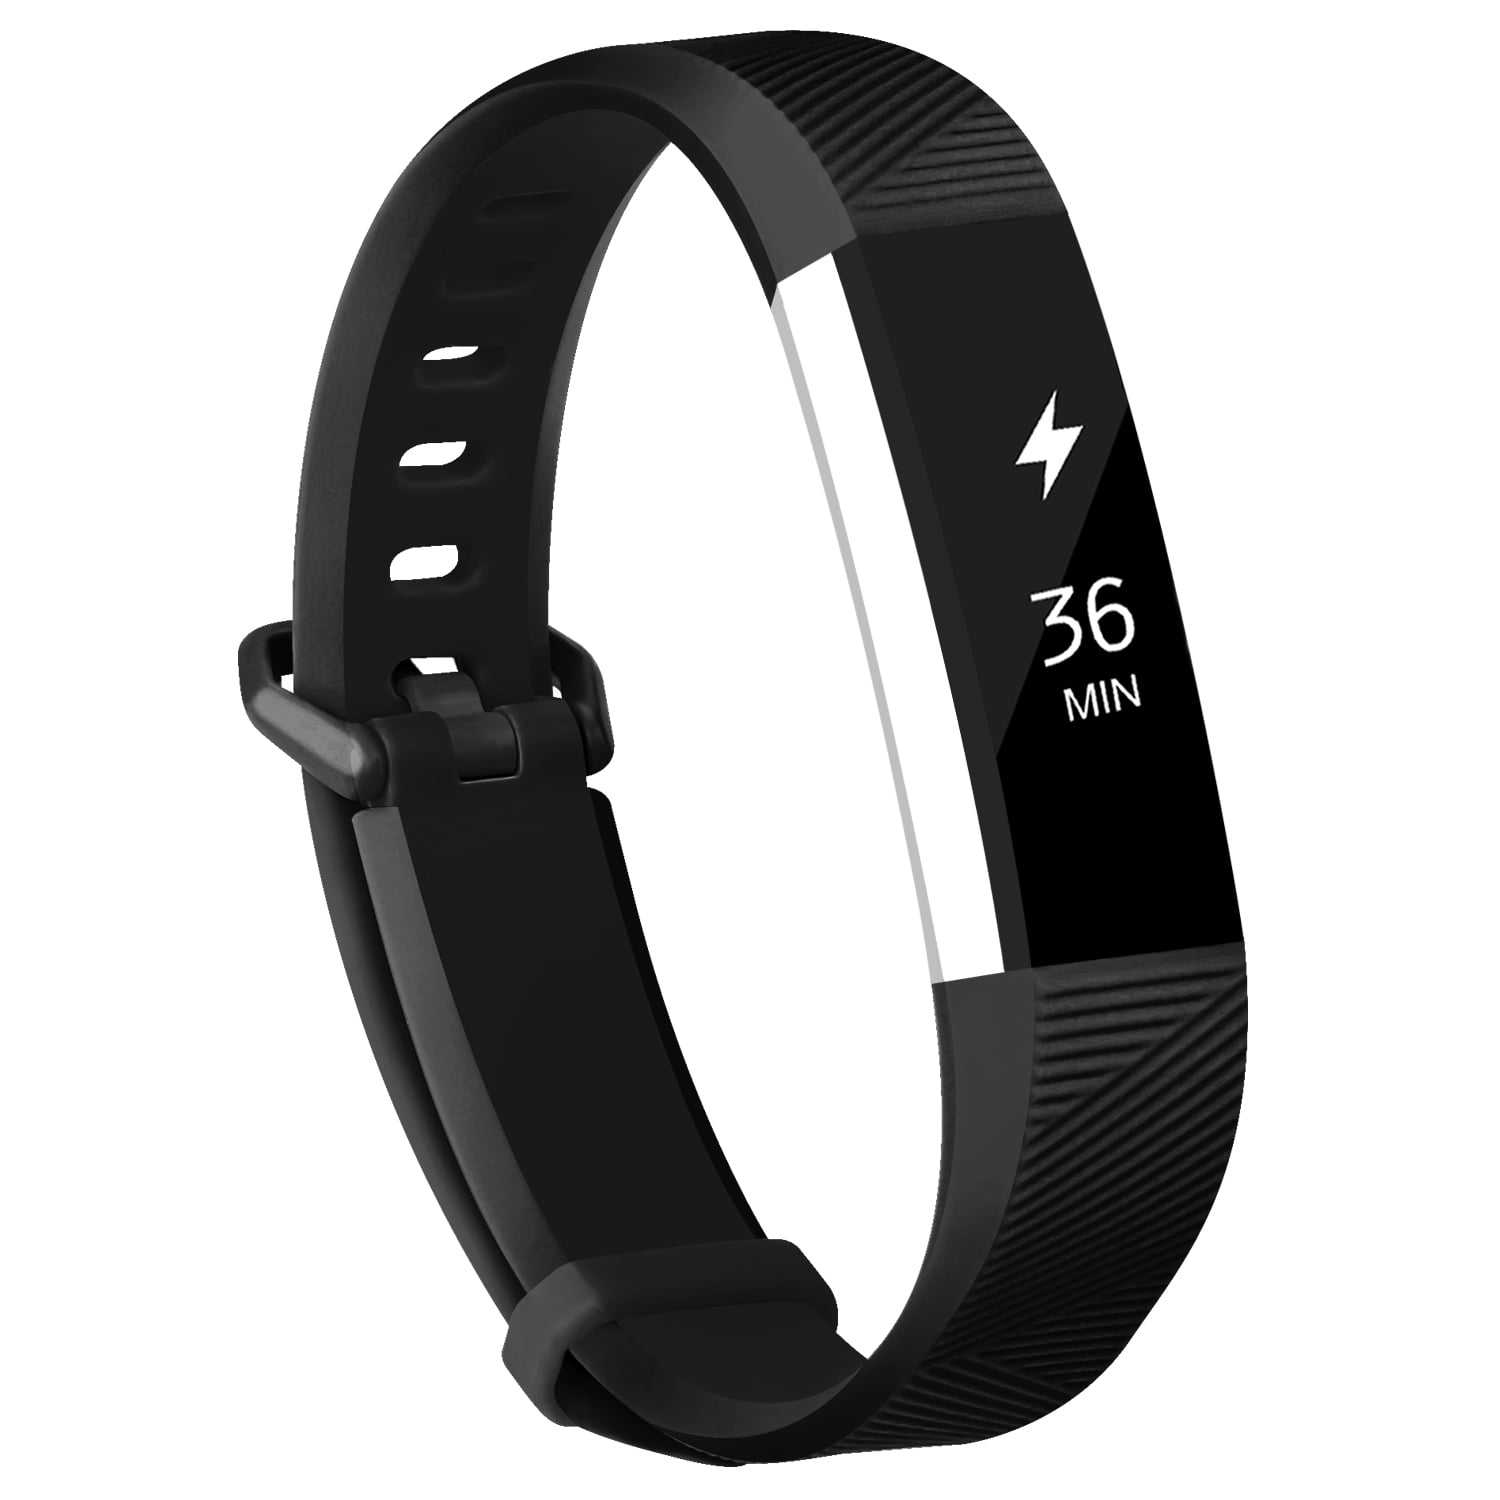 Wristbands Silicone Band Bracelet Strap For Fitbit Versa|Fitbit Alta HR 